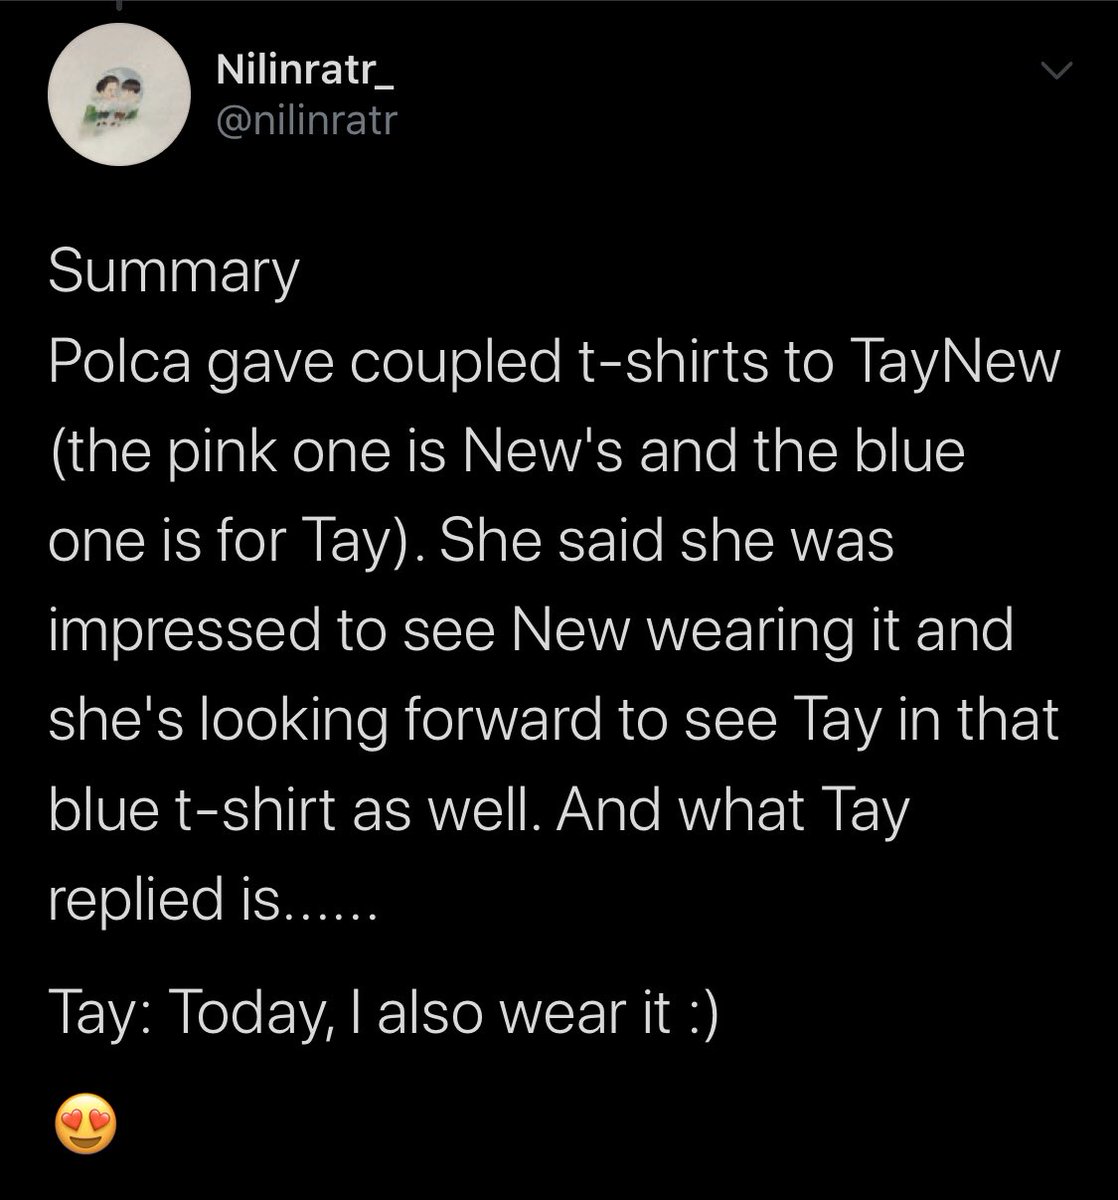 10/18/18 Korea Day 3not just couple umbro shoes but they were also wearing a couple shirt gifted by a fan. Pink for New and Blue for Tay.cr: nilinratr